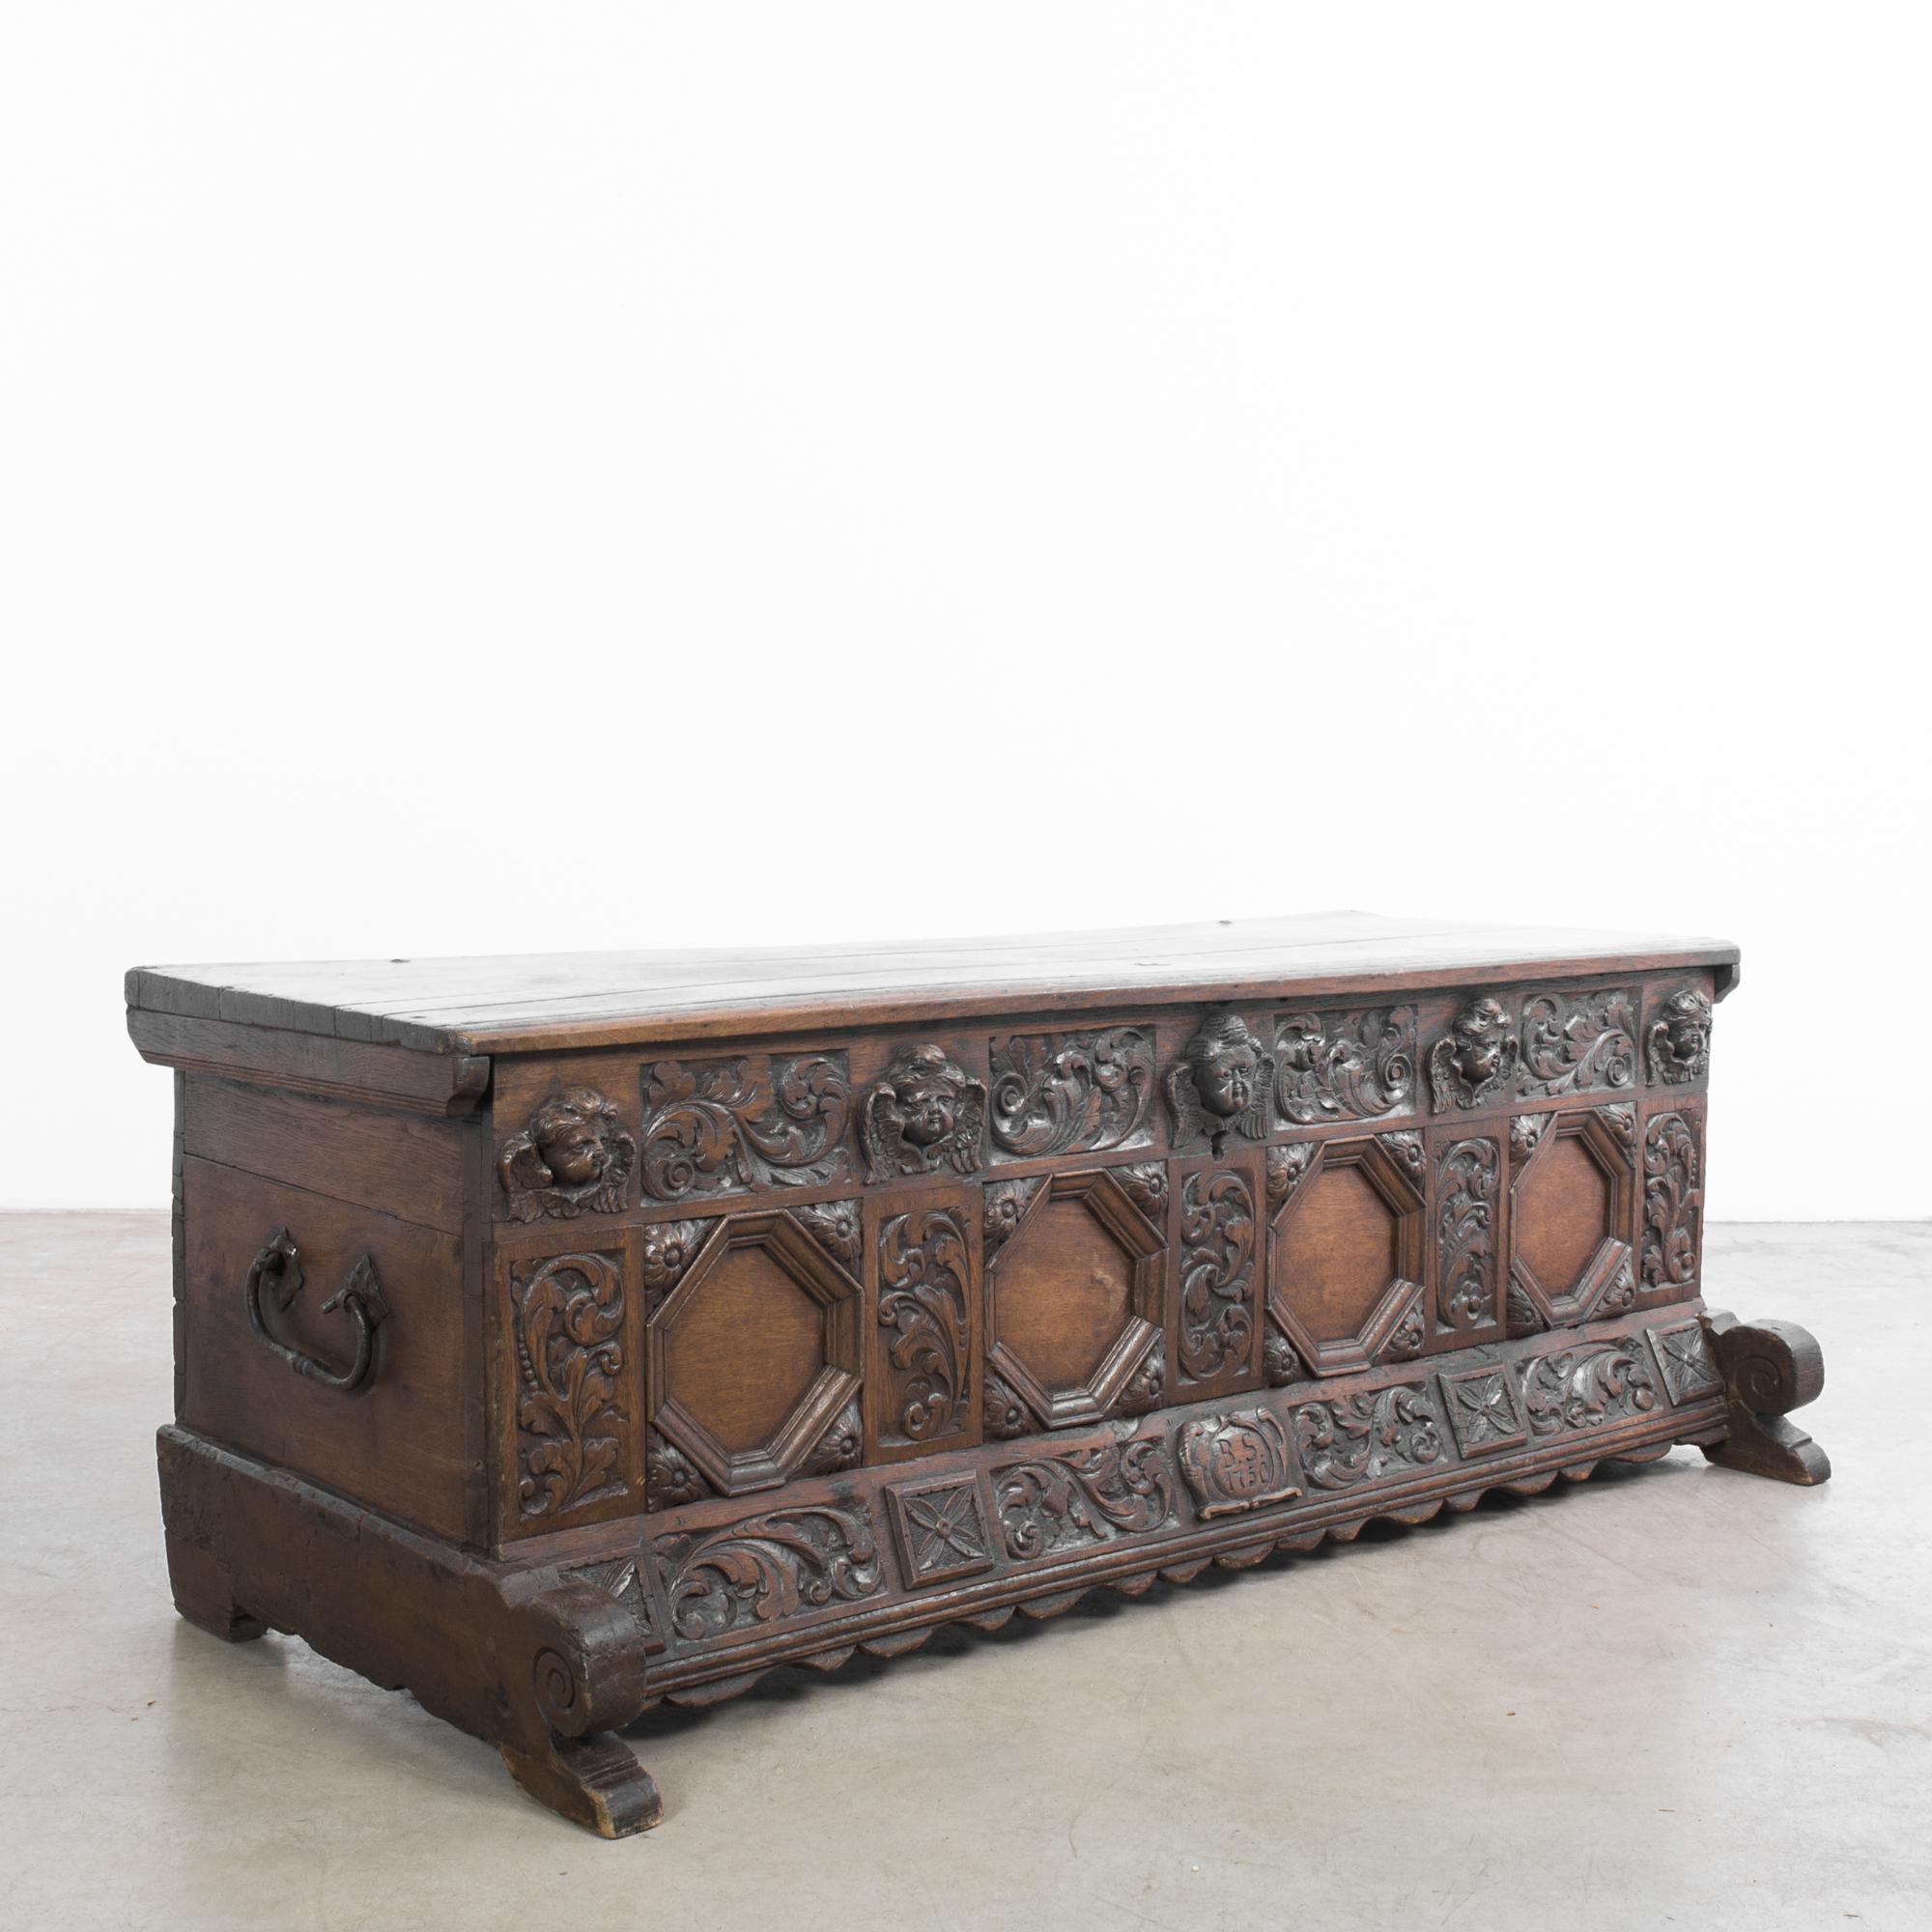 Step into the historical elegance of the 1720s with the German Wooden Trunk, a fine example of continental craftsmanship. This exquisitely carved oak coffer from Germany boasts a beautifully carved arcaded front, retaining its original lock and key,